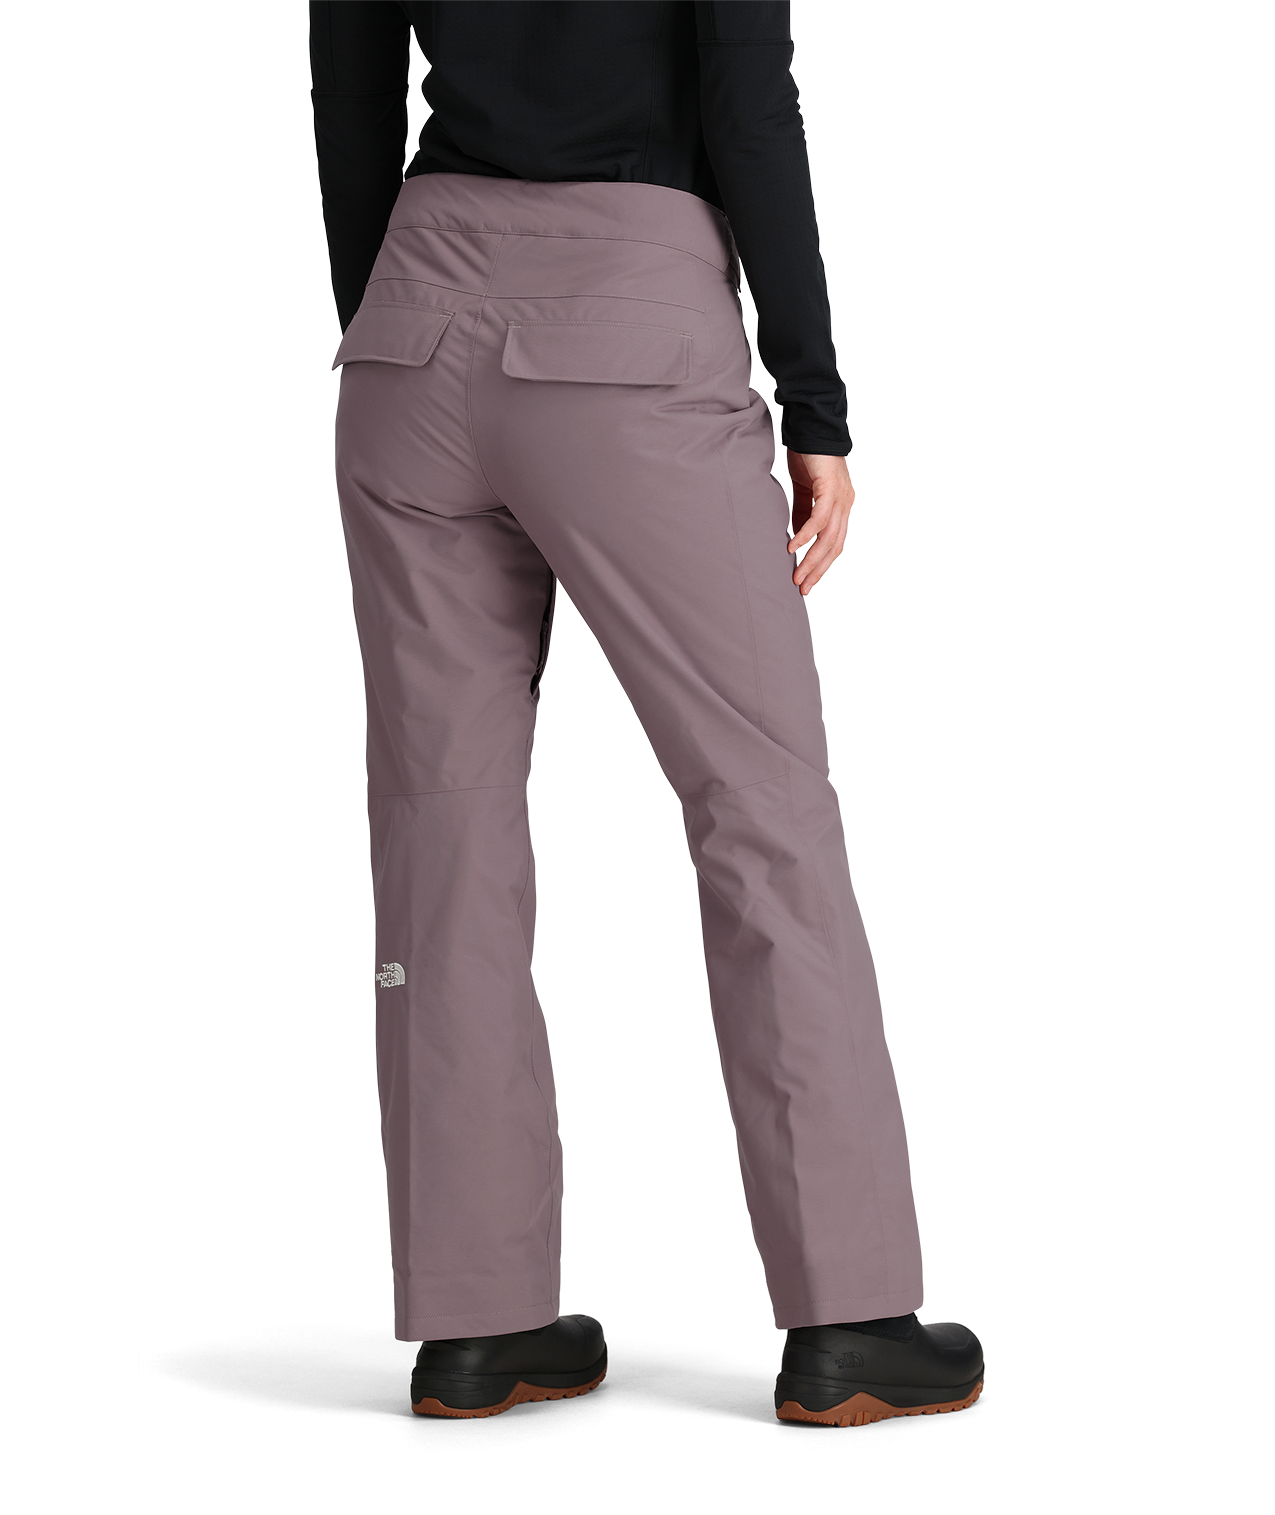 The North Face Womens Aboutaday Pant - Women's backcountry ski pants